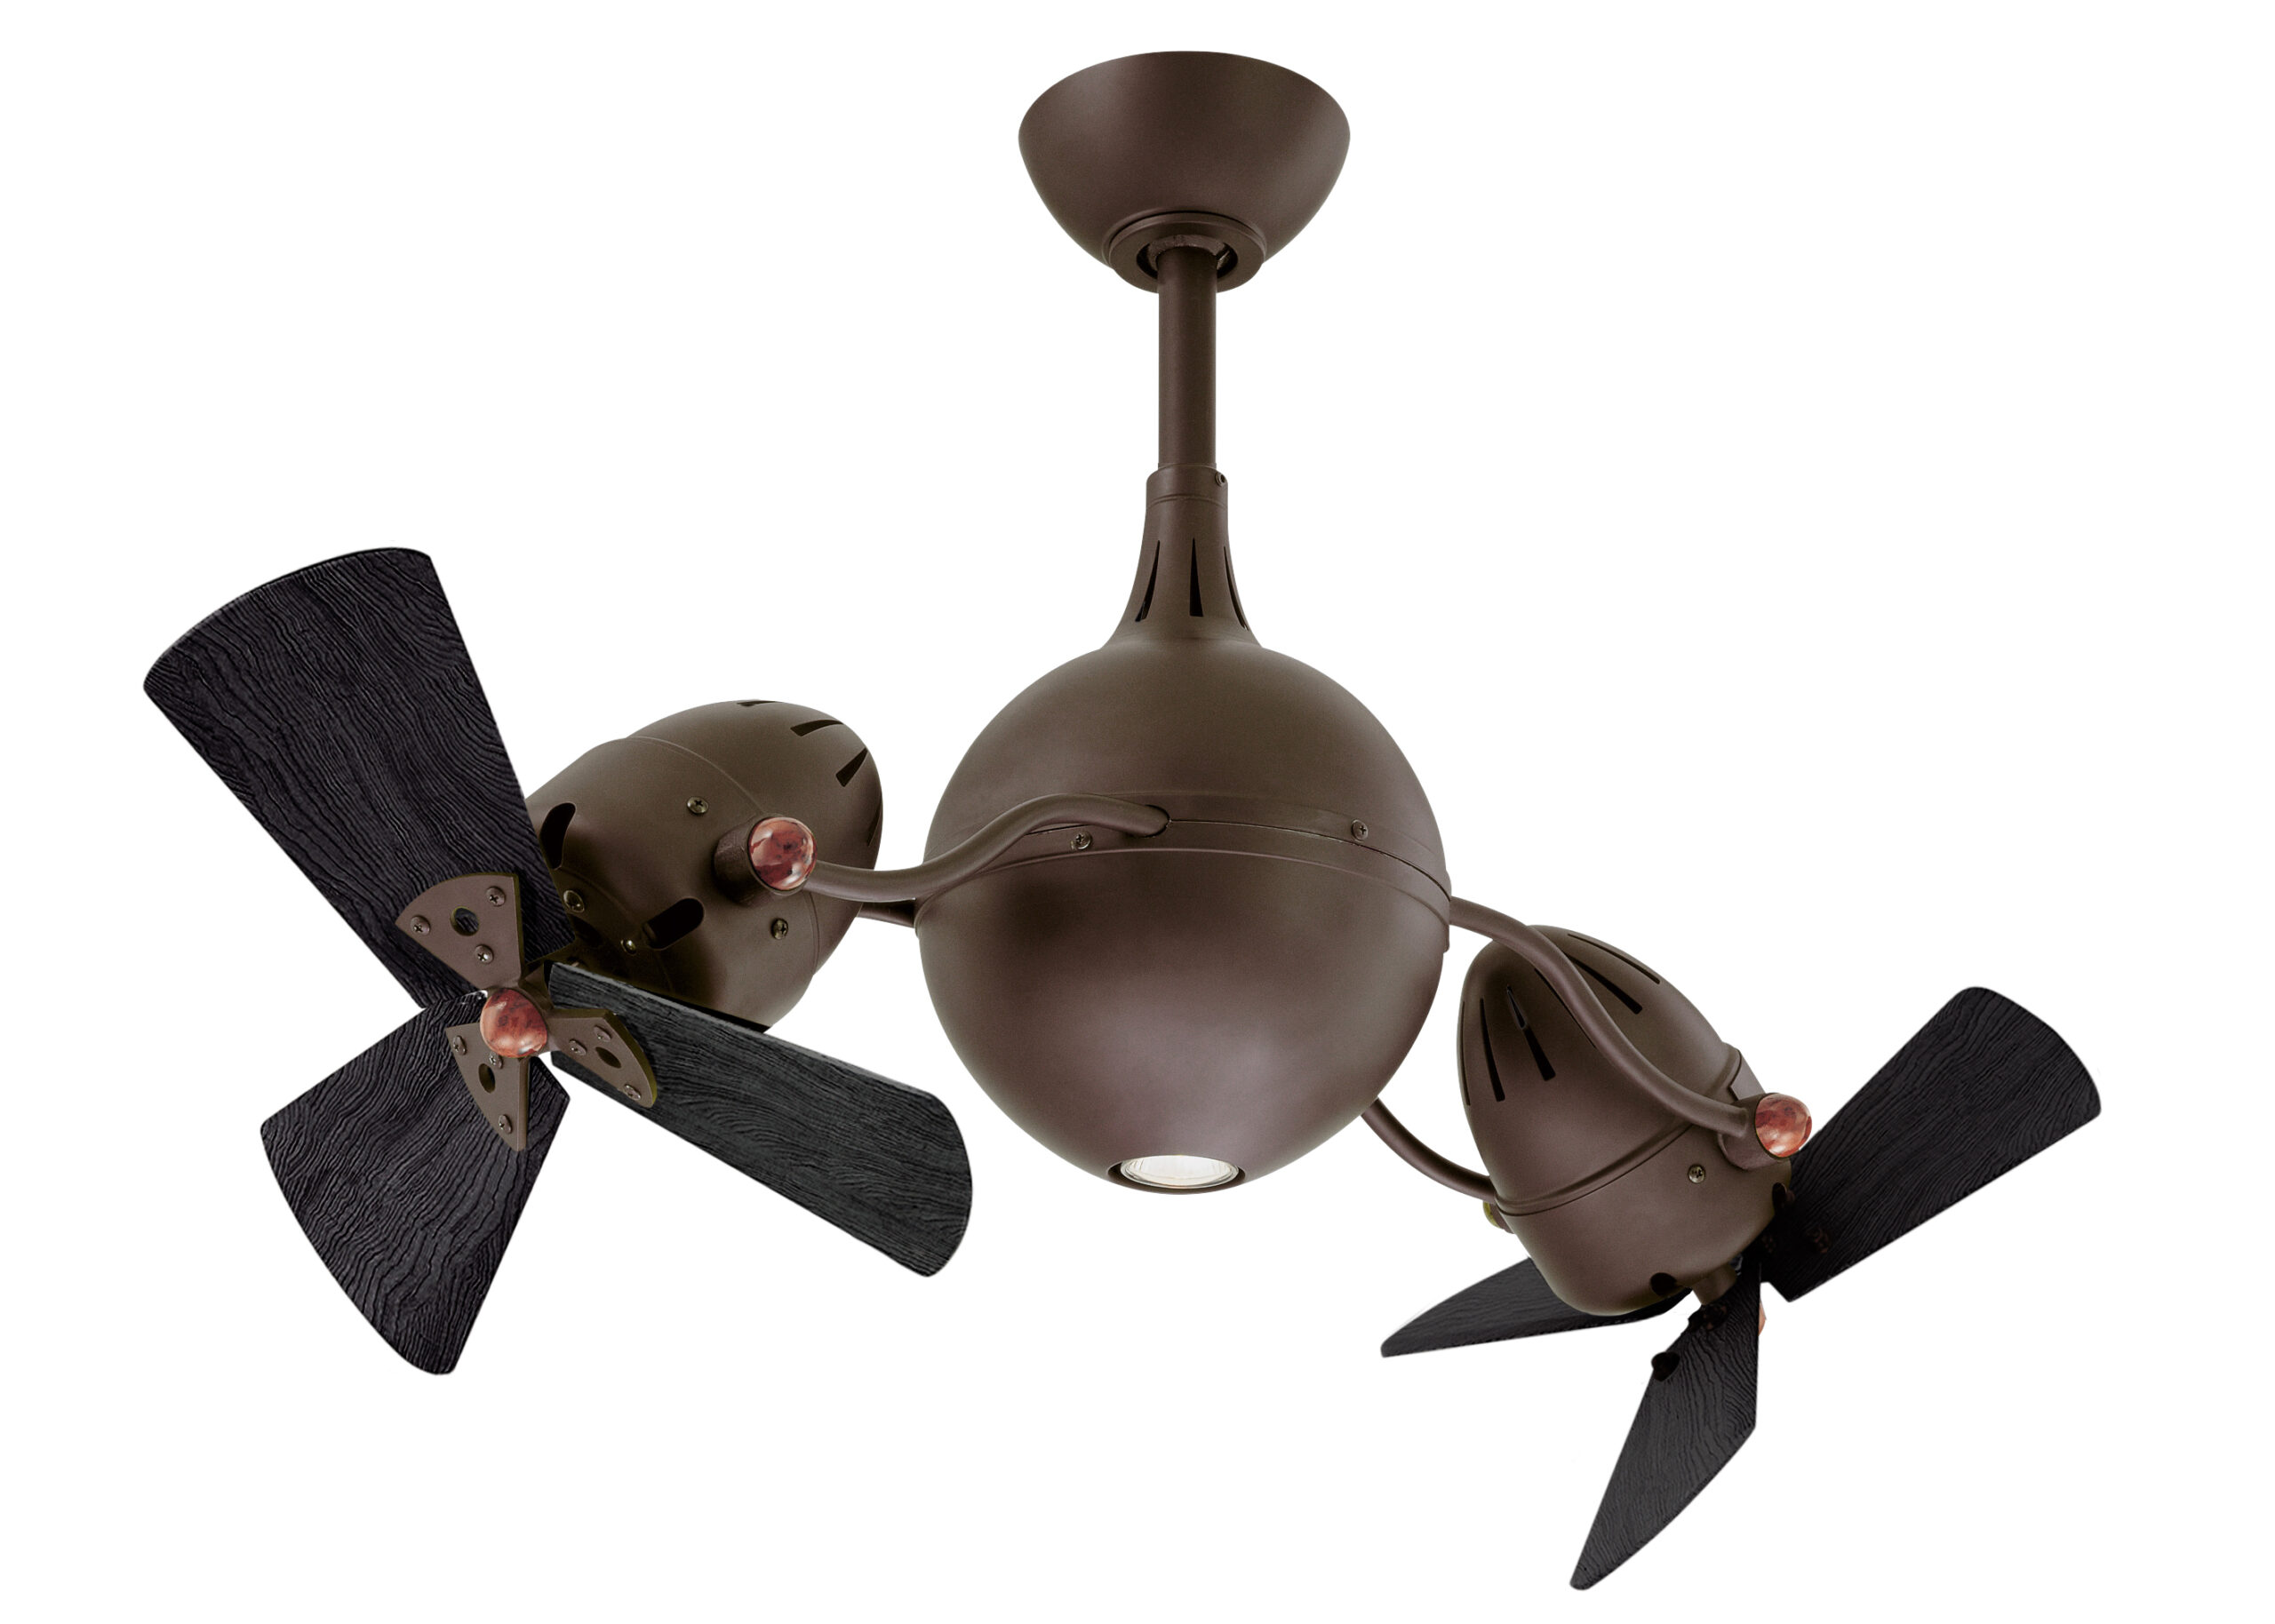 Acqua Rotational Ceiling Fan in Textured Bronze with Matte Black Blades